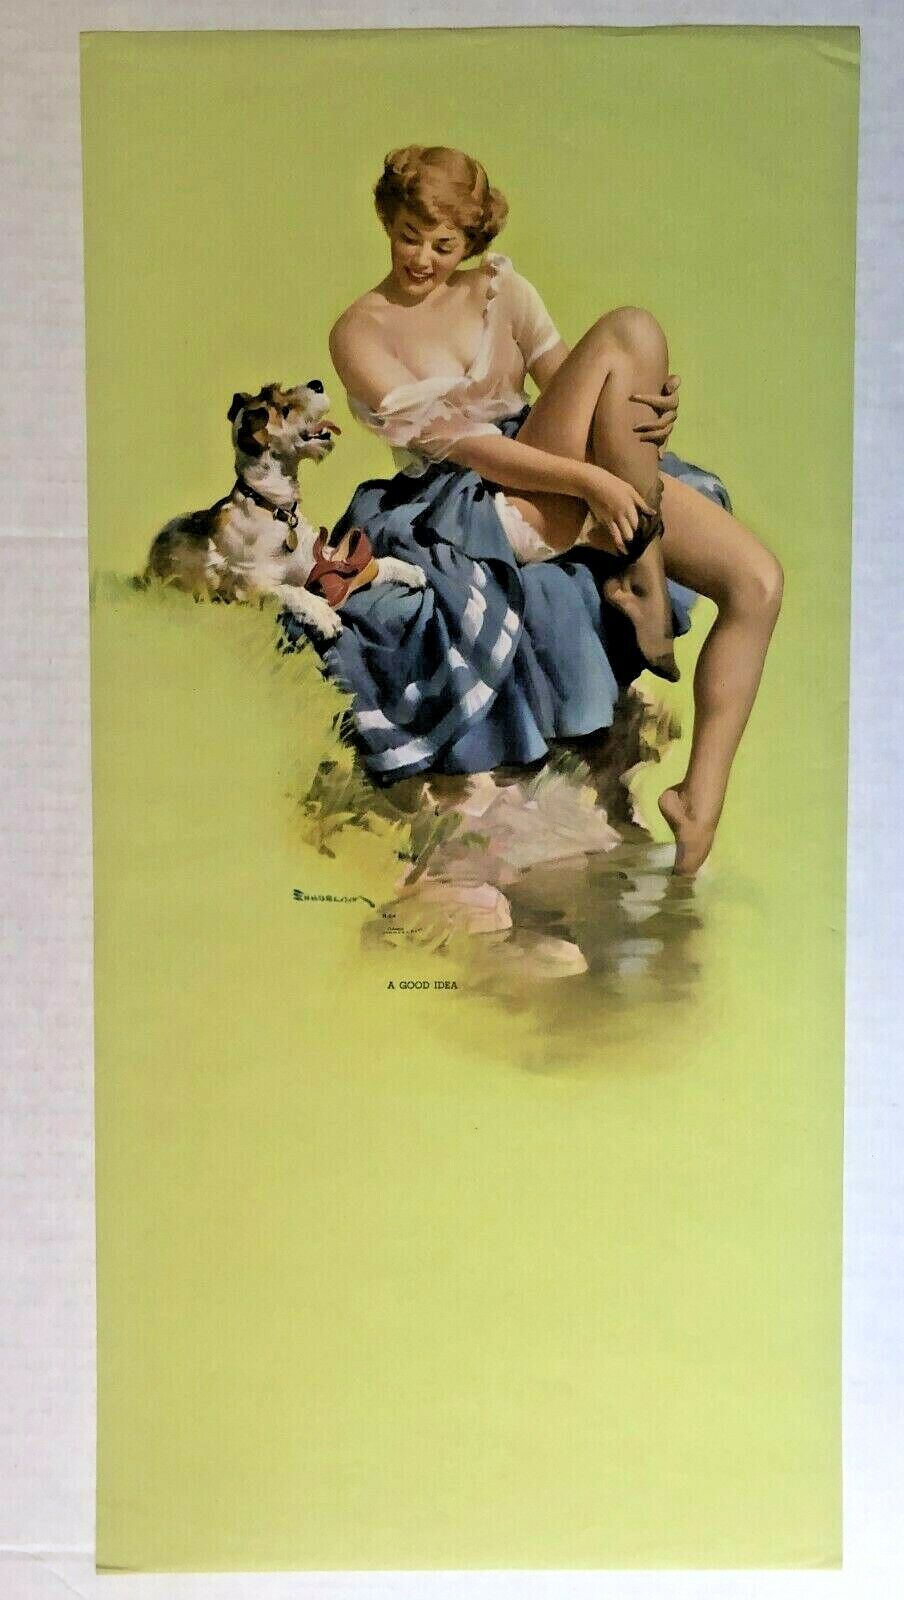 Beautiful 1950's Pinup Girl Picture Blond Woman w/ Terrier Dog